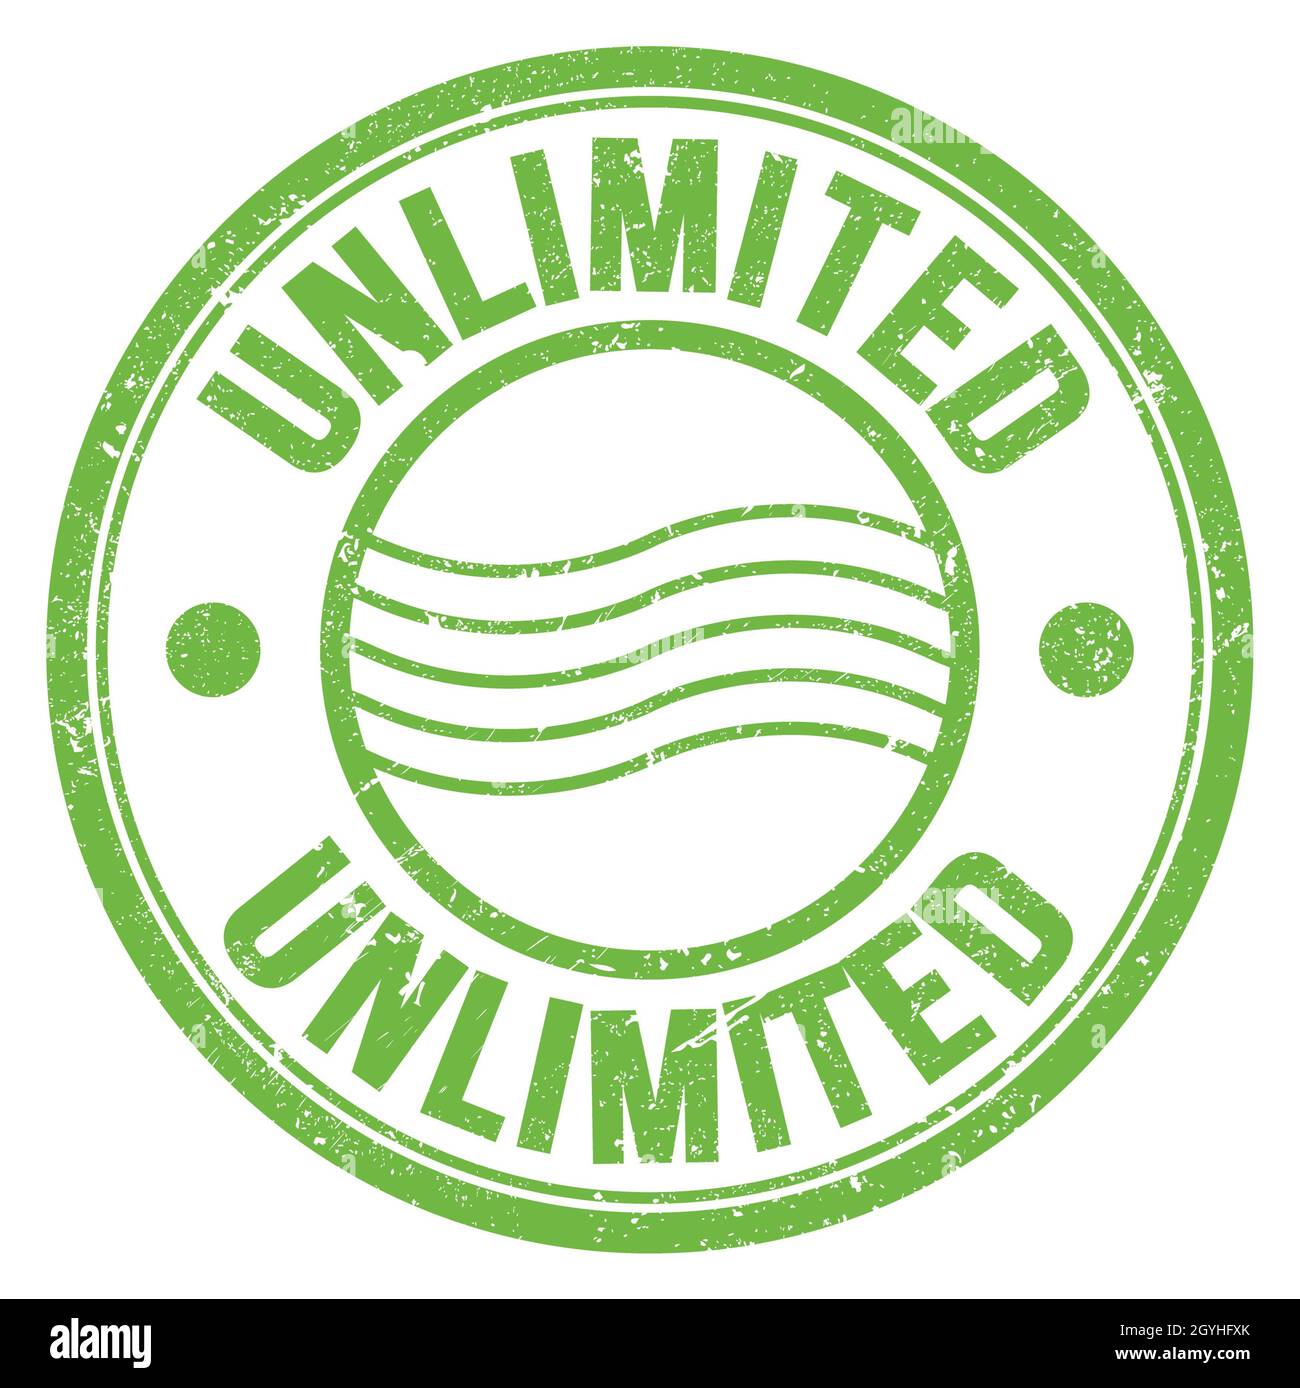 UNLIMITED word written on green round postal stamp sign Stock Photo